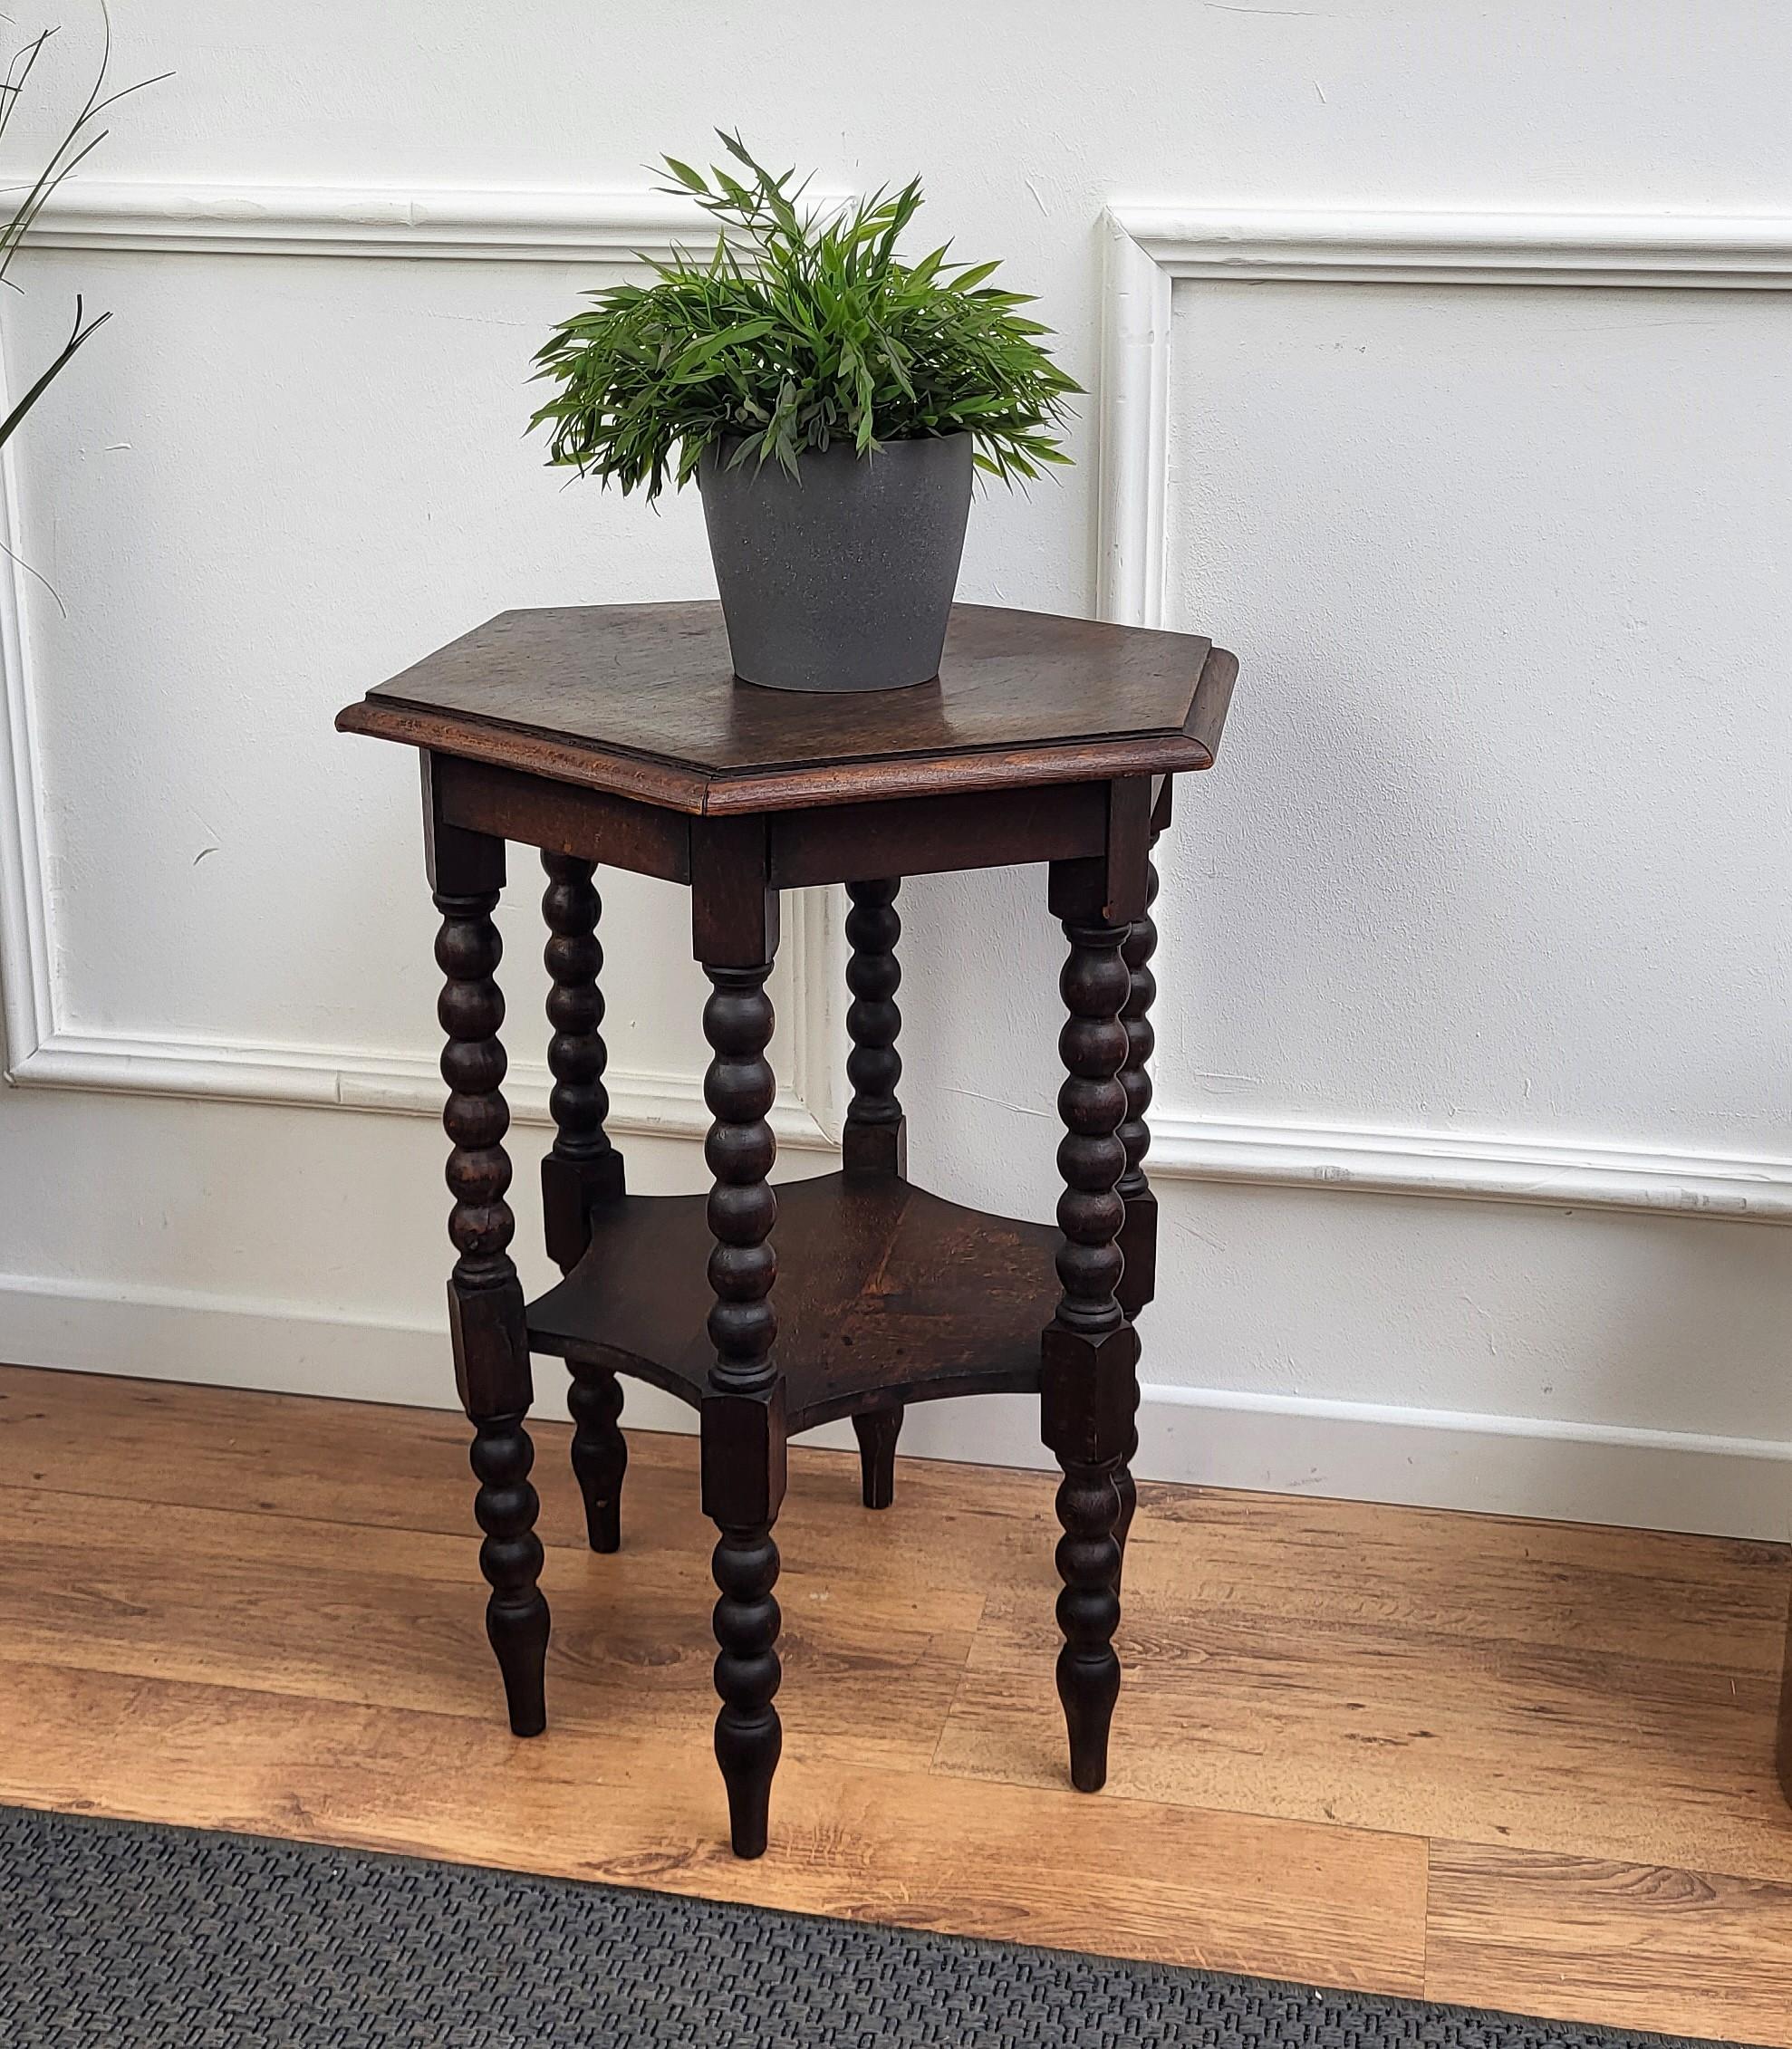 Beautiful antique Italian solid walnut side table or stool features hexagonal top with beveled edges over six beautifully bobbin turned barley twisted legs, connected to one another with central star shaped central stretcher.
 
This Italian walnut